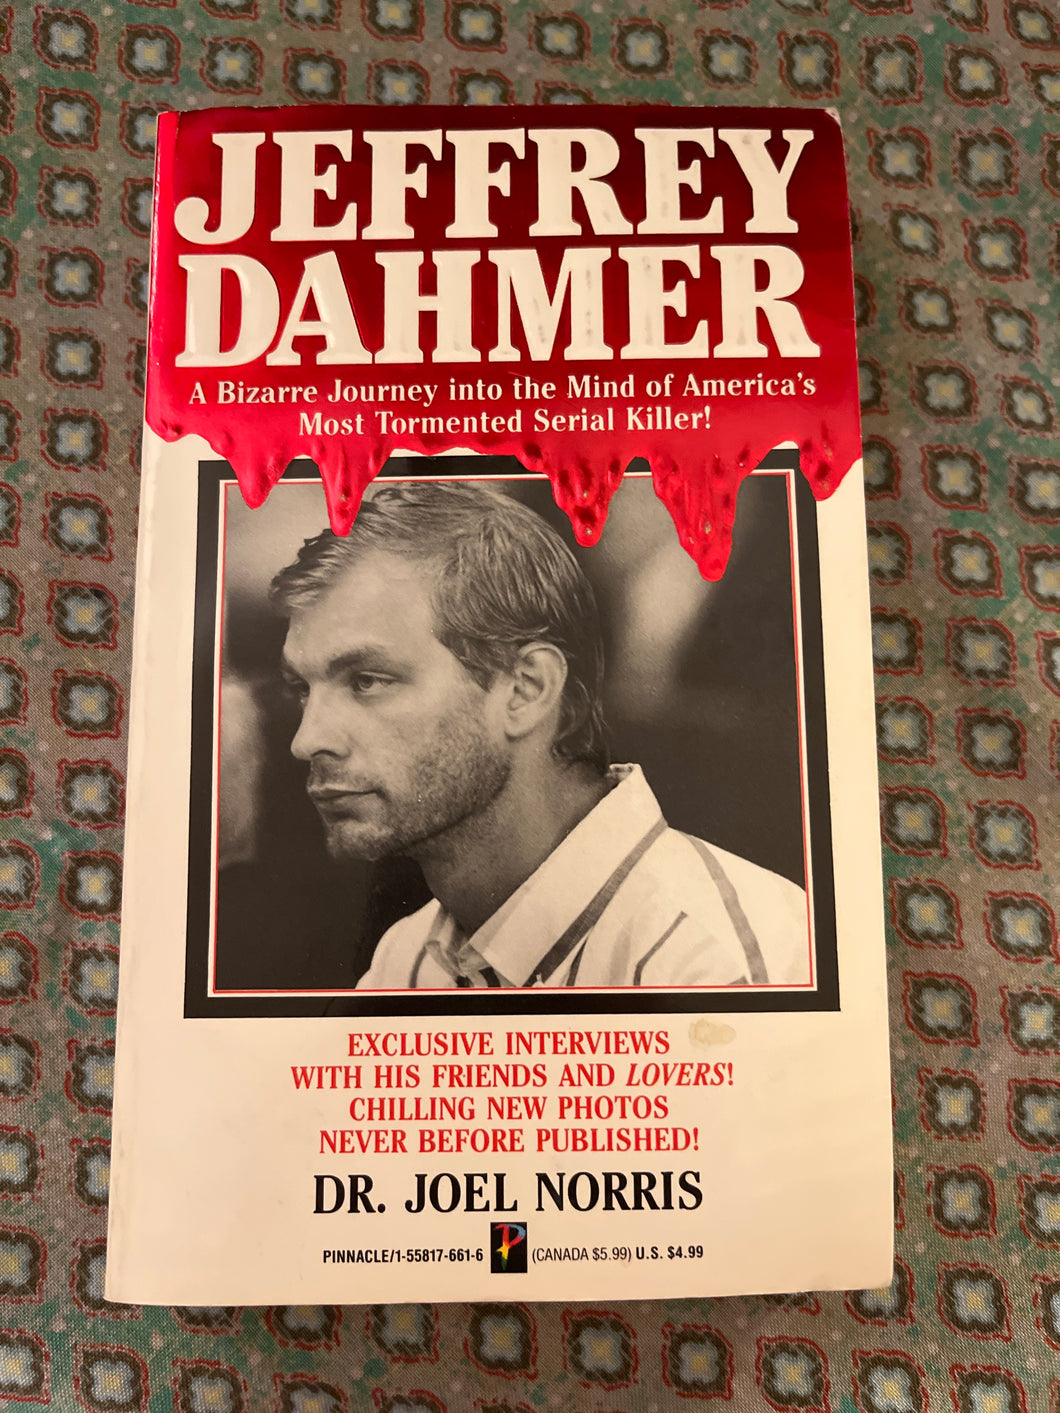 Jeffrey Dahmer: A Bizarre Journey into the Mind of America's Most Tormented Serial Killer!